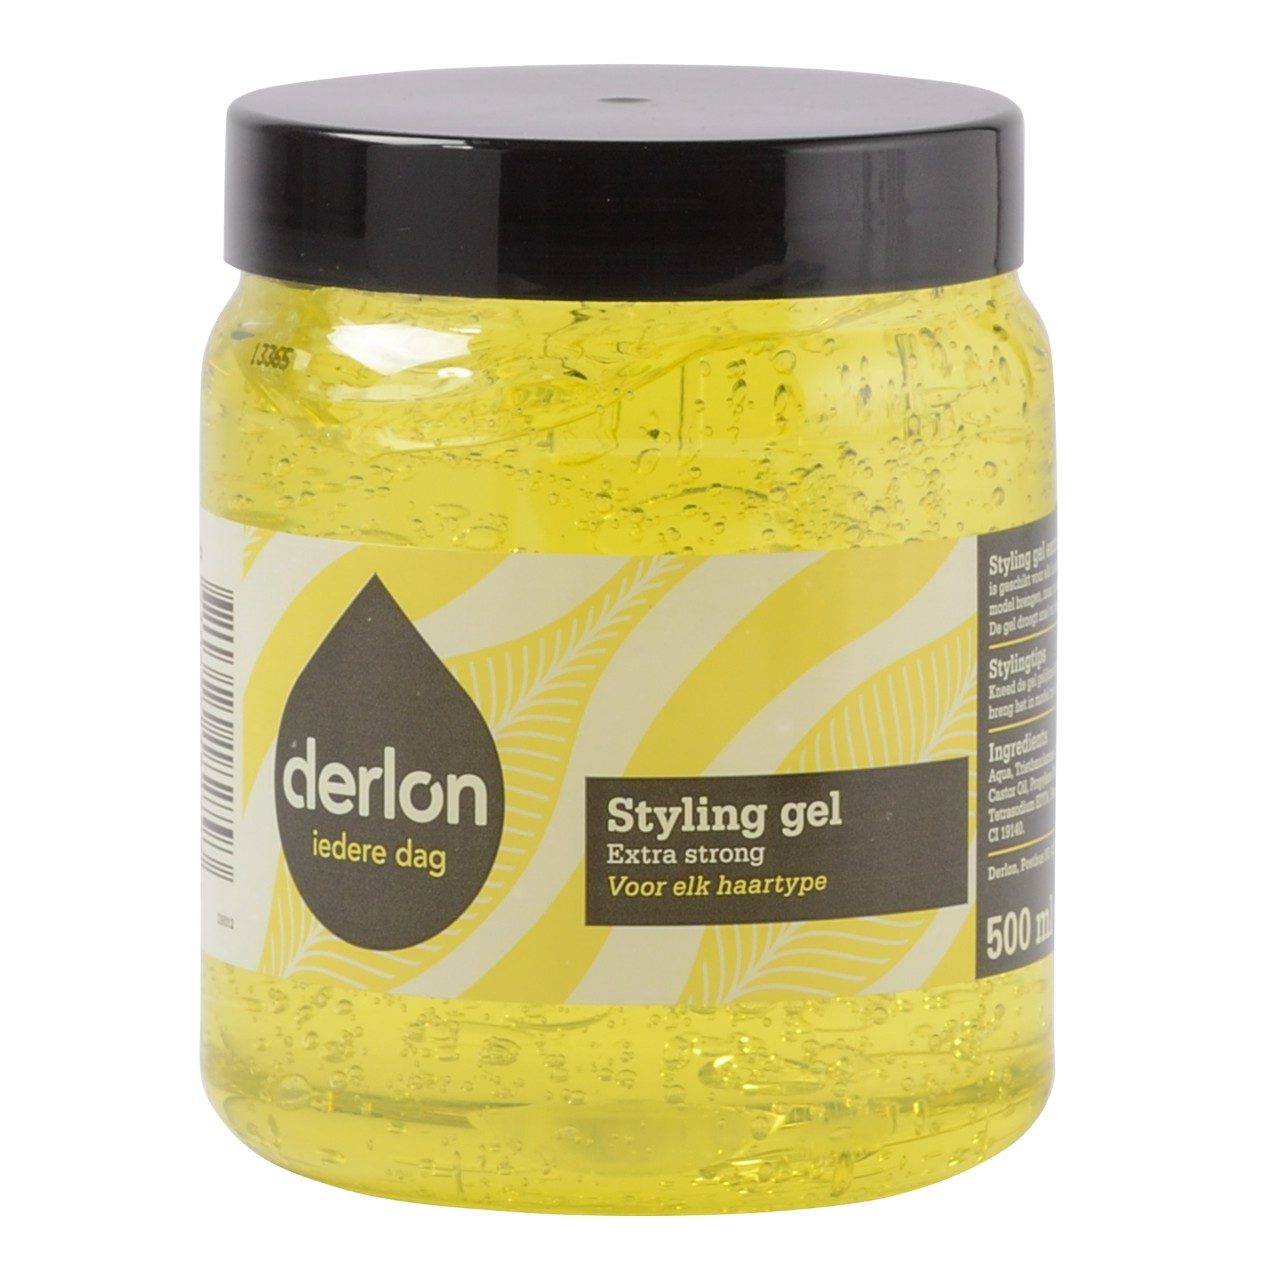 Styling gel extra strong